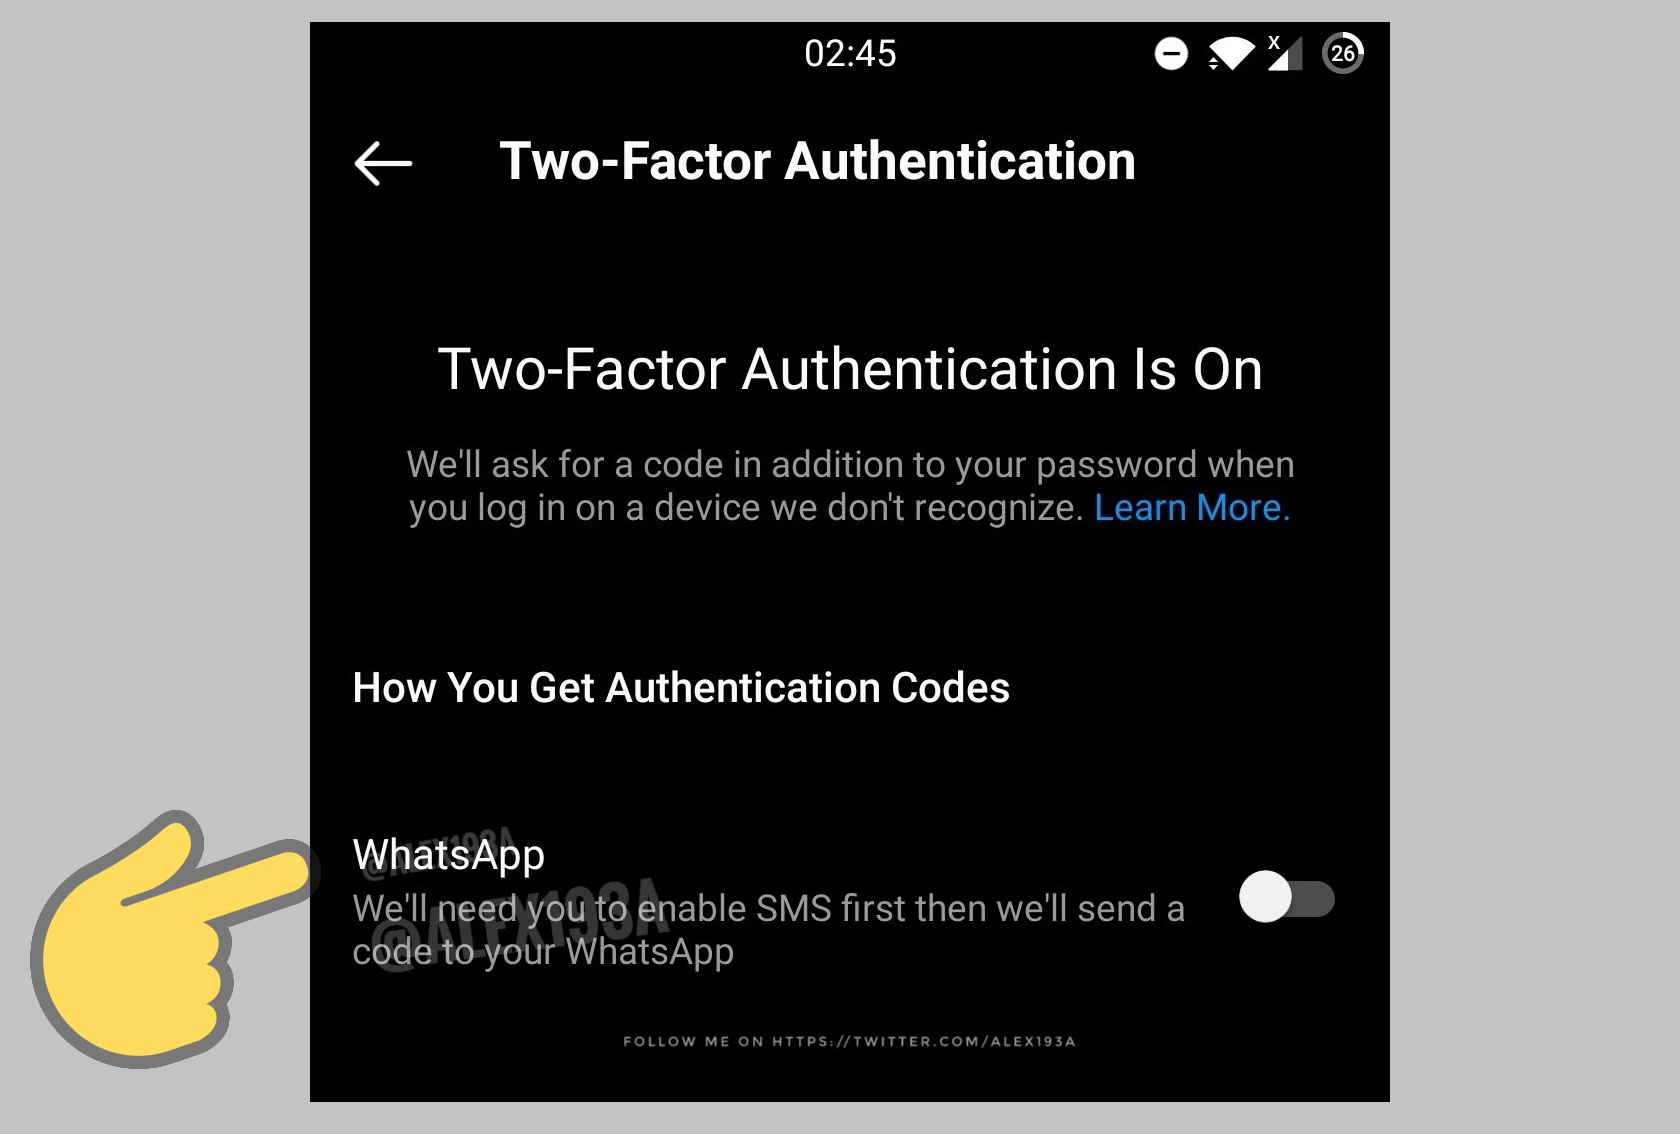 Facebook: Here's How to Turn On Two-Factor Authentication